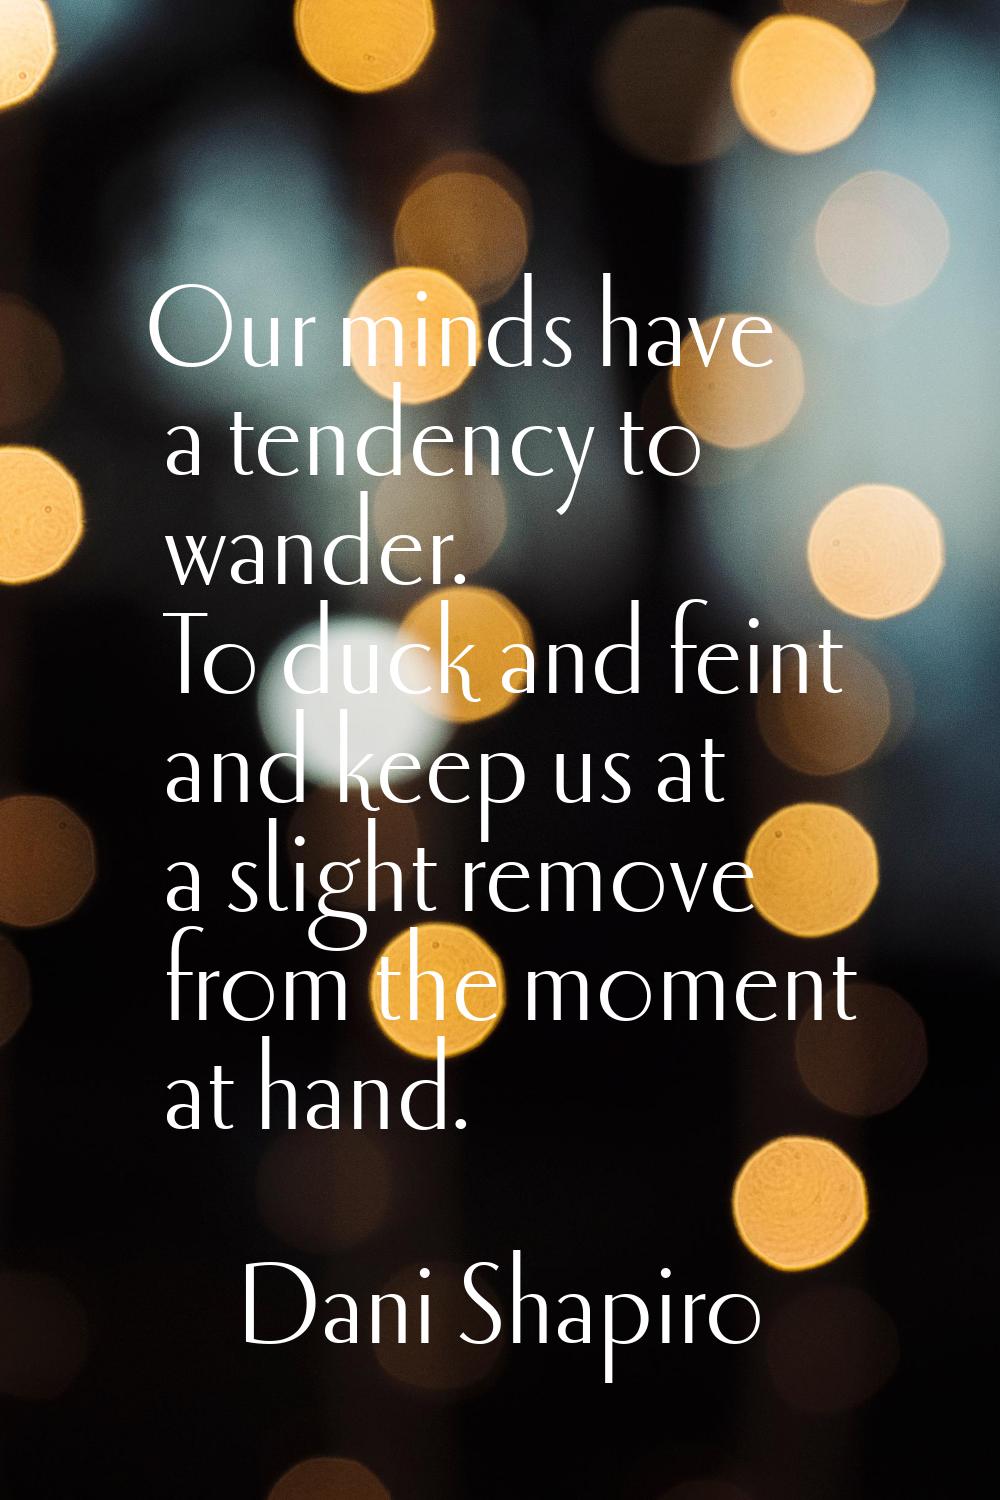 Our minds have a tendency to wander. To duck and feint and keep us at a slight remove from the mome